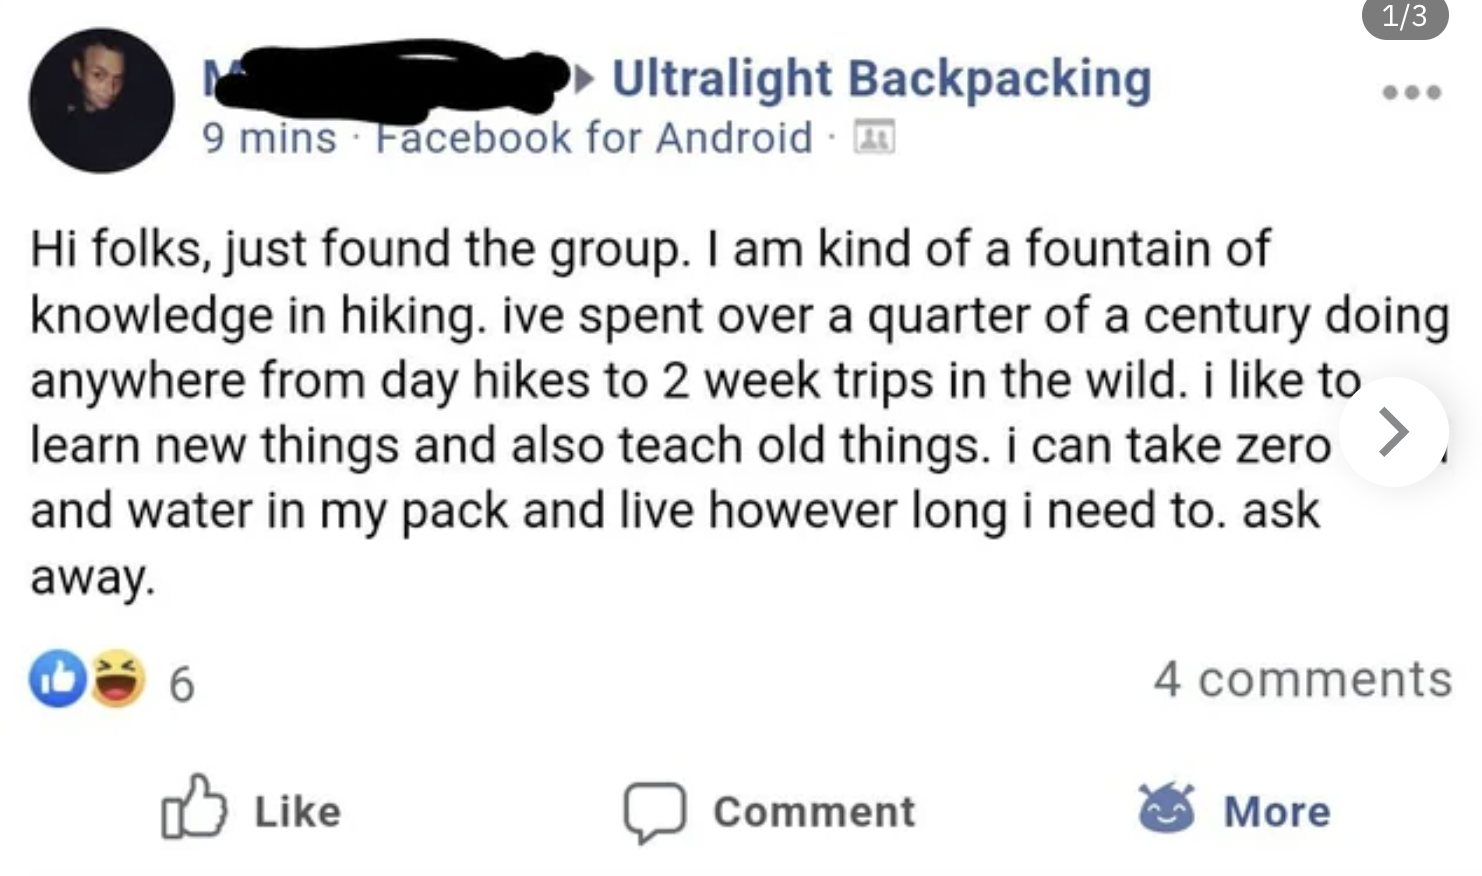 Trashy Pics - paper - 6 Ultralight Backpacking 9 mins Facebook for Android Hi folks, just found the group. I am kind of a fountain of knowledge in hiking